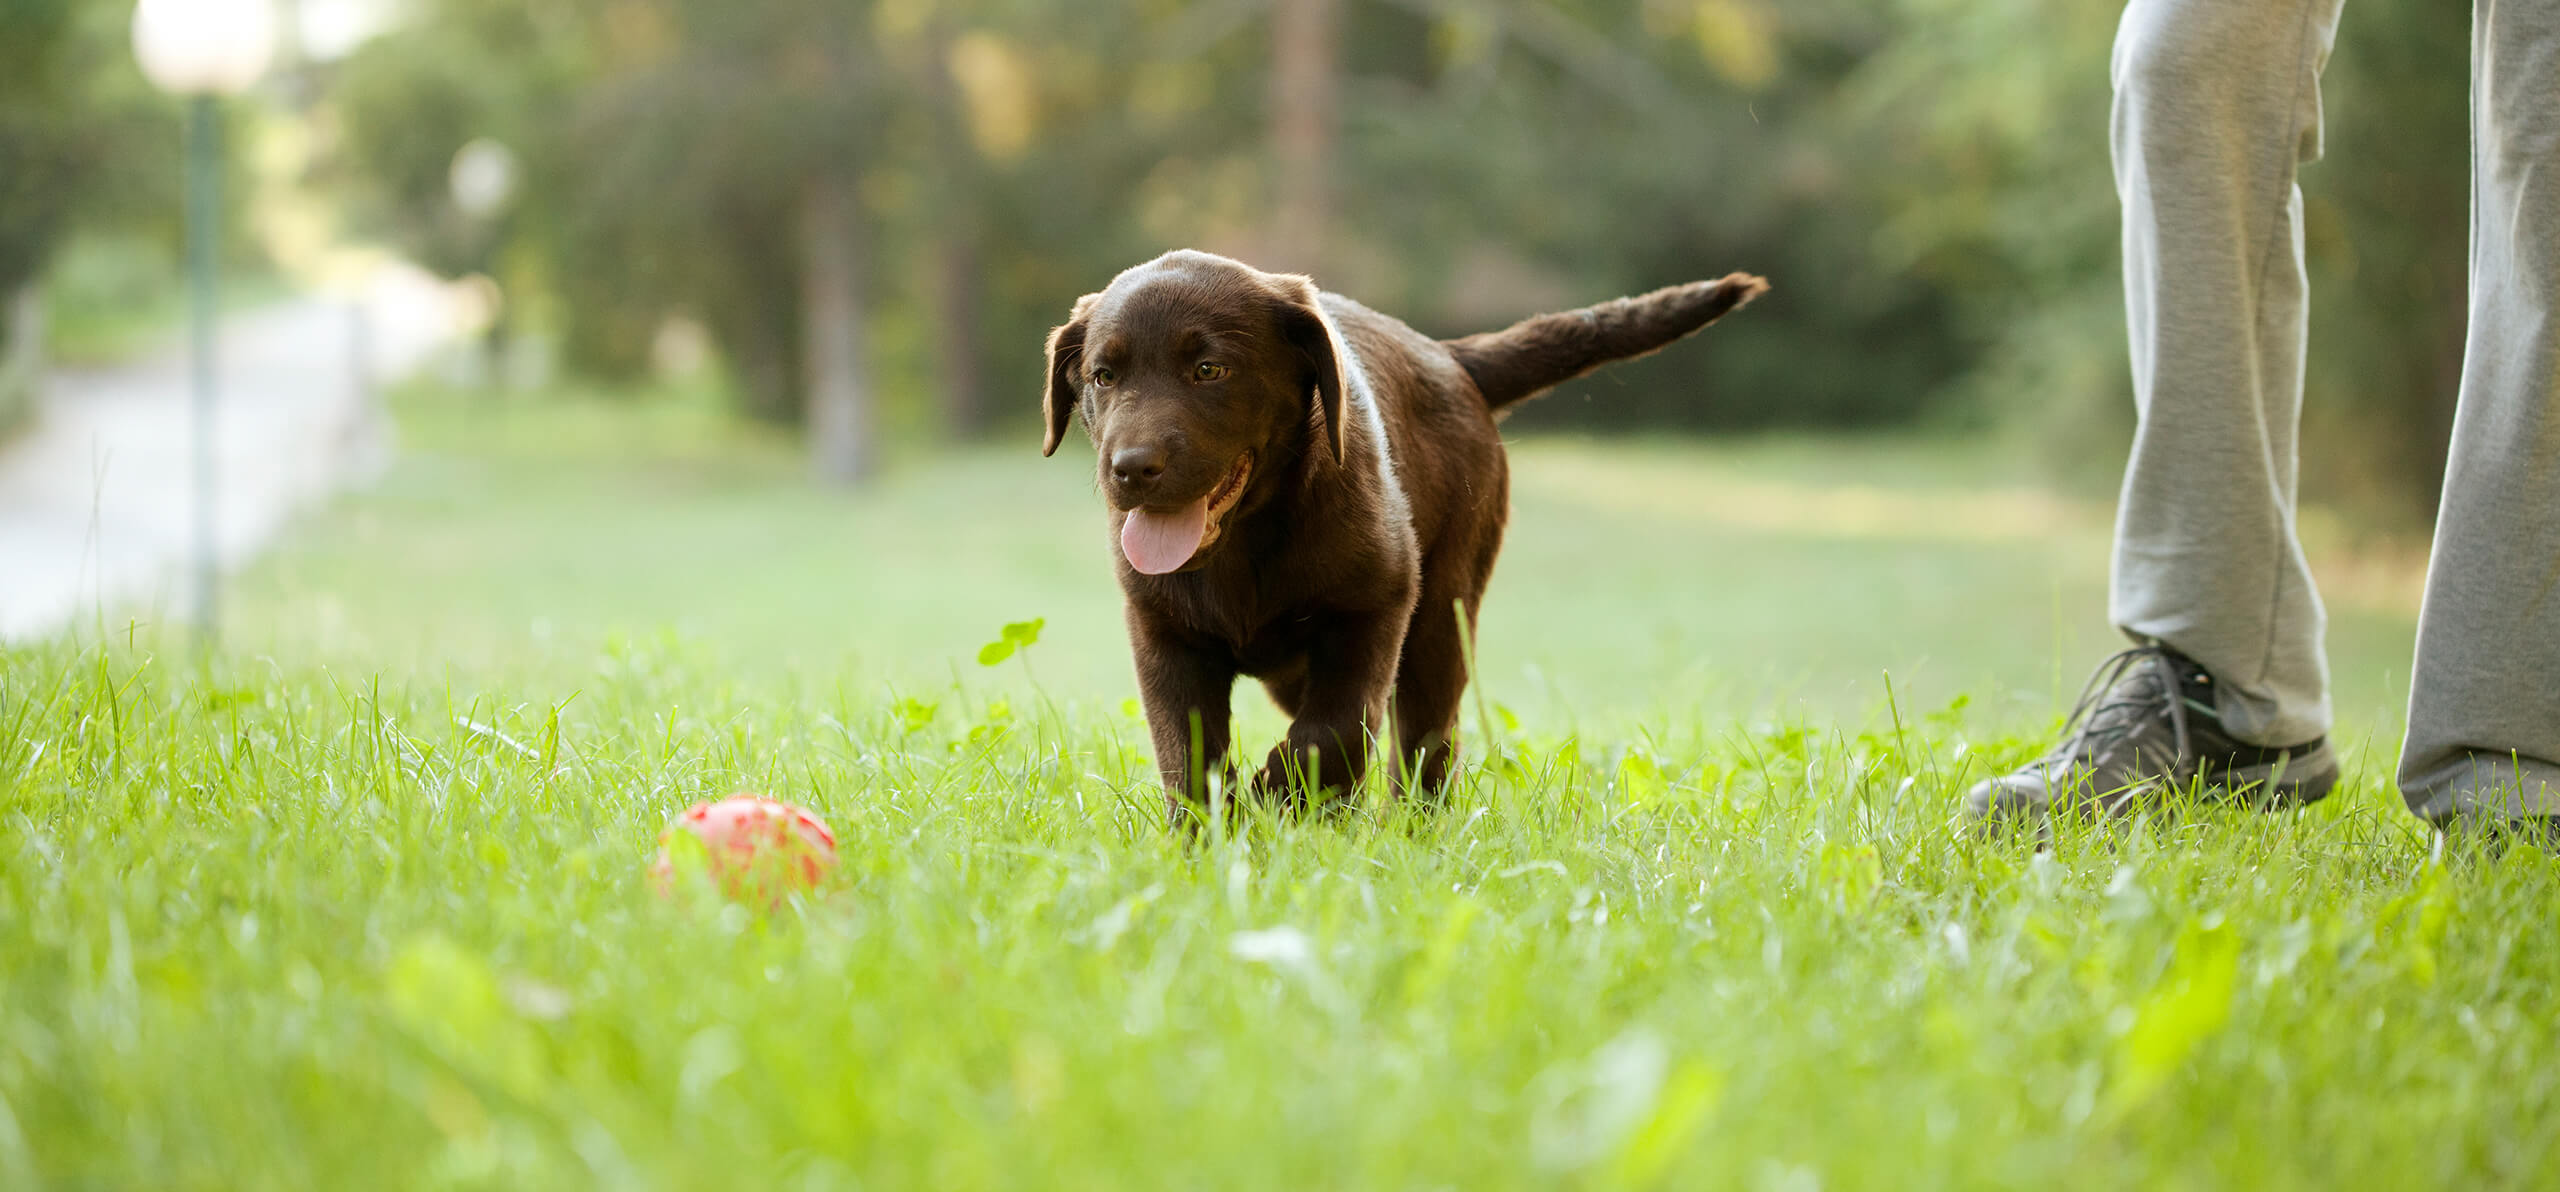 puppy approaching ball in the grass